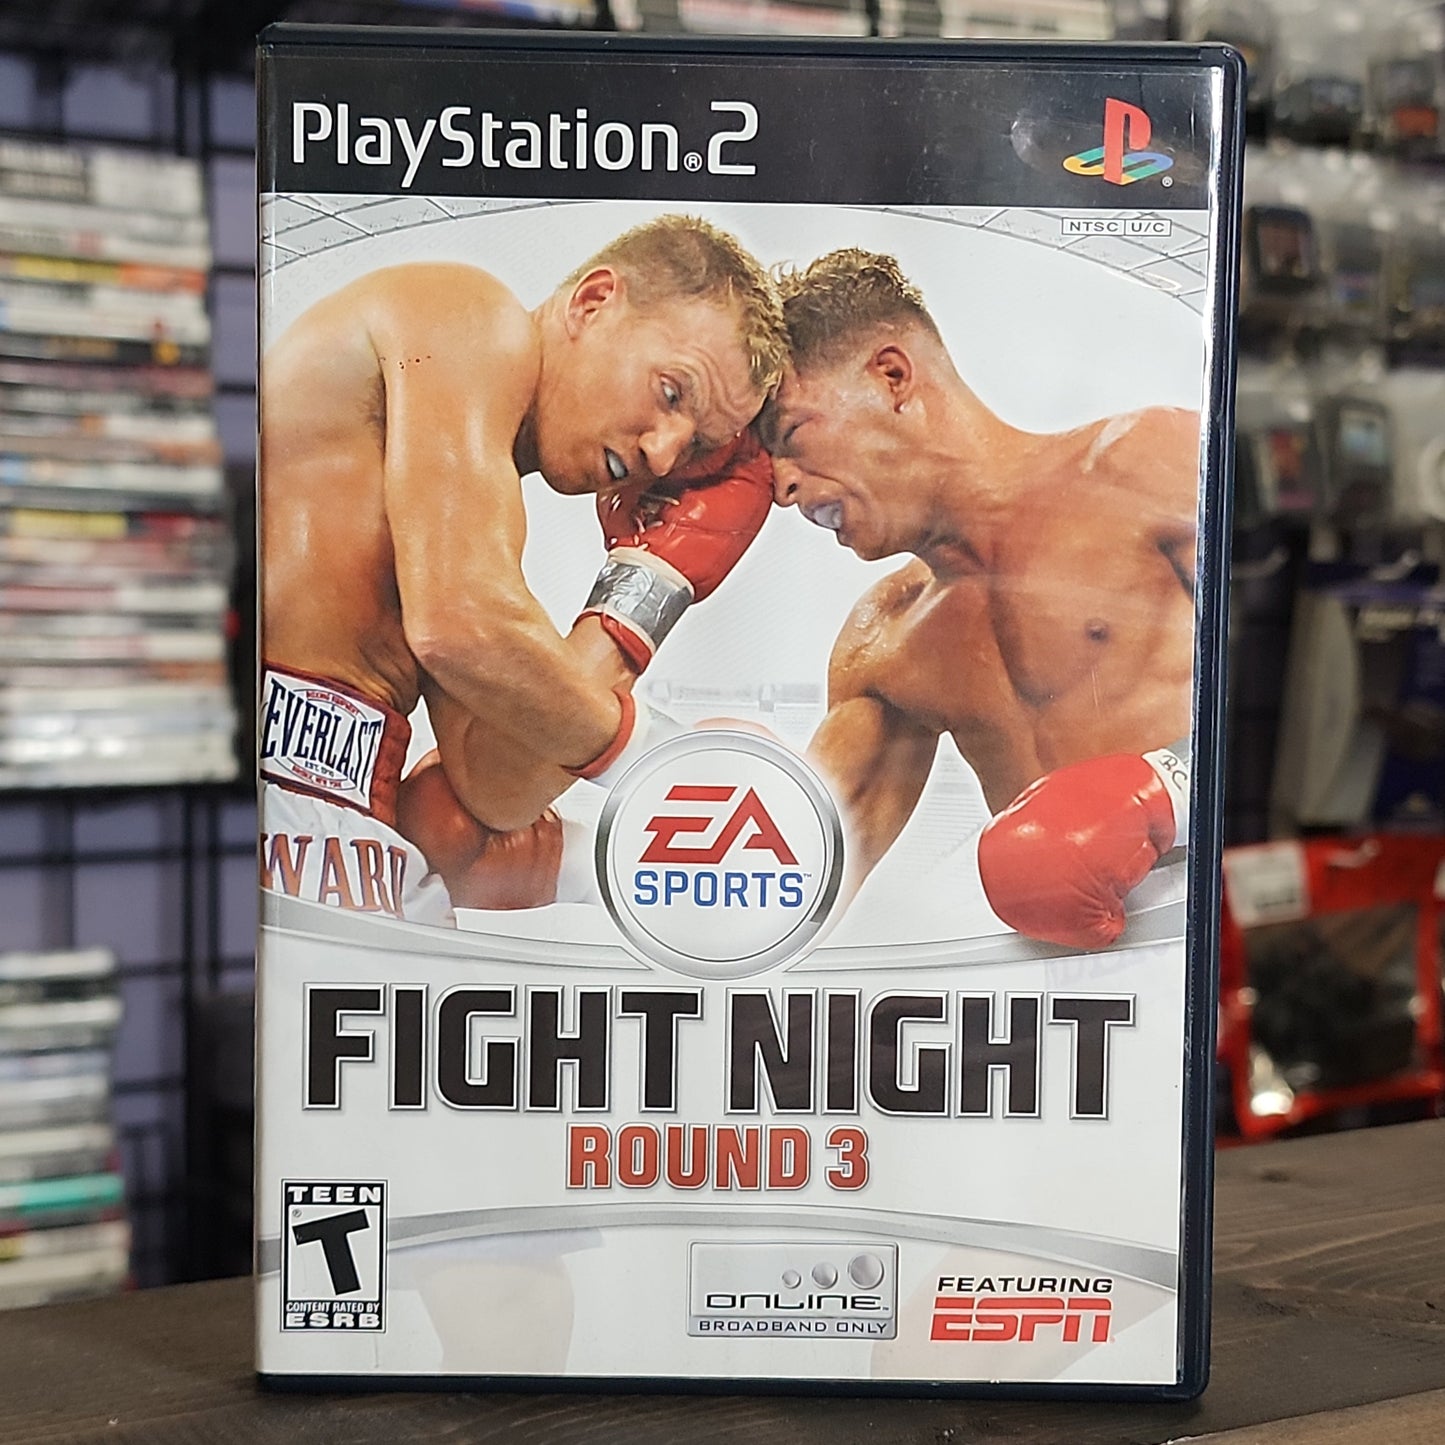 Playstation 2 - Fight Night: Round 3 Retrograde Collectibles Boxing, CIB, EA Chicago, EA Sports, Fight Night, Playstation 2, PS2, Sports, T Rated Preowned Video Game 